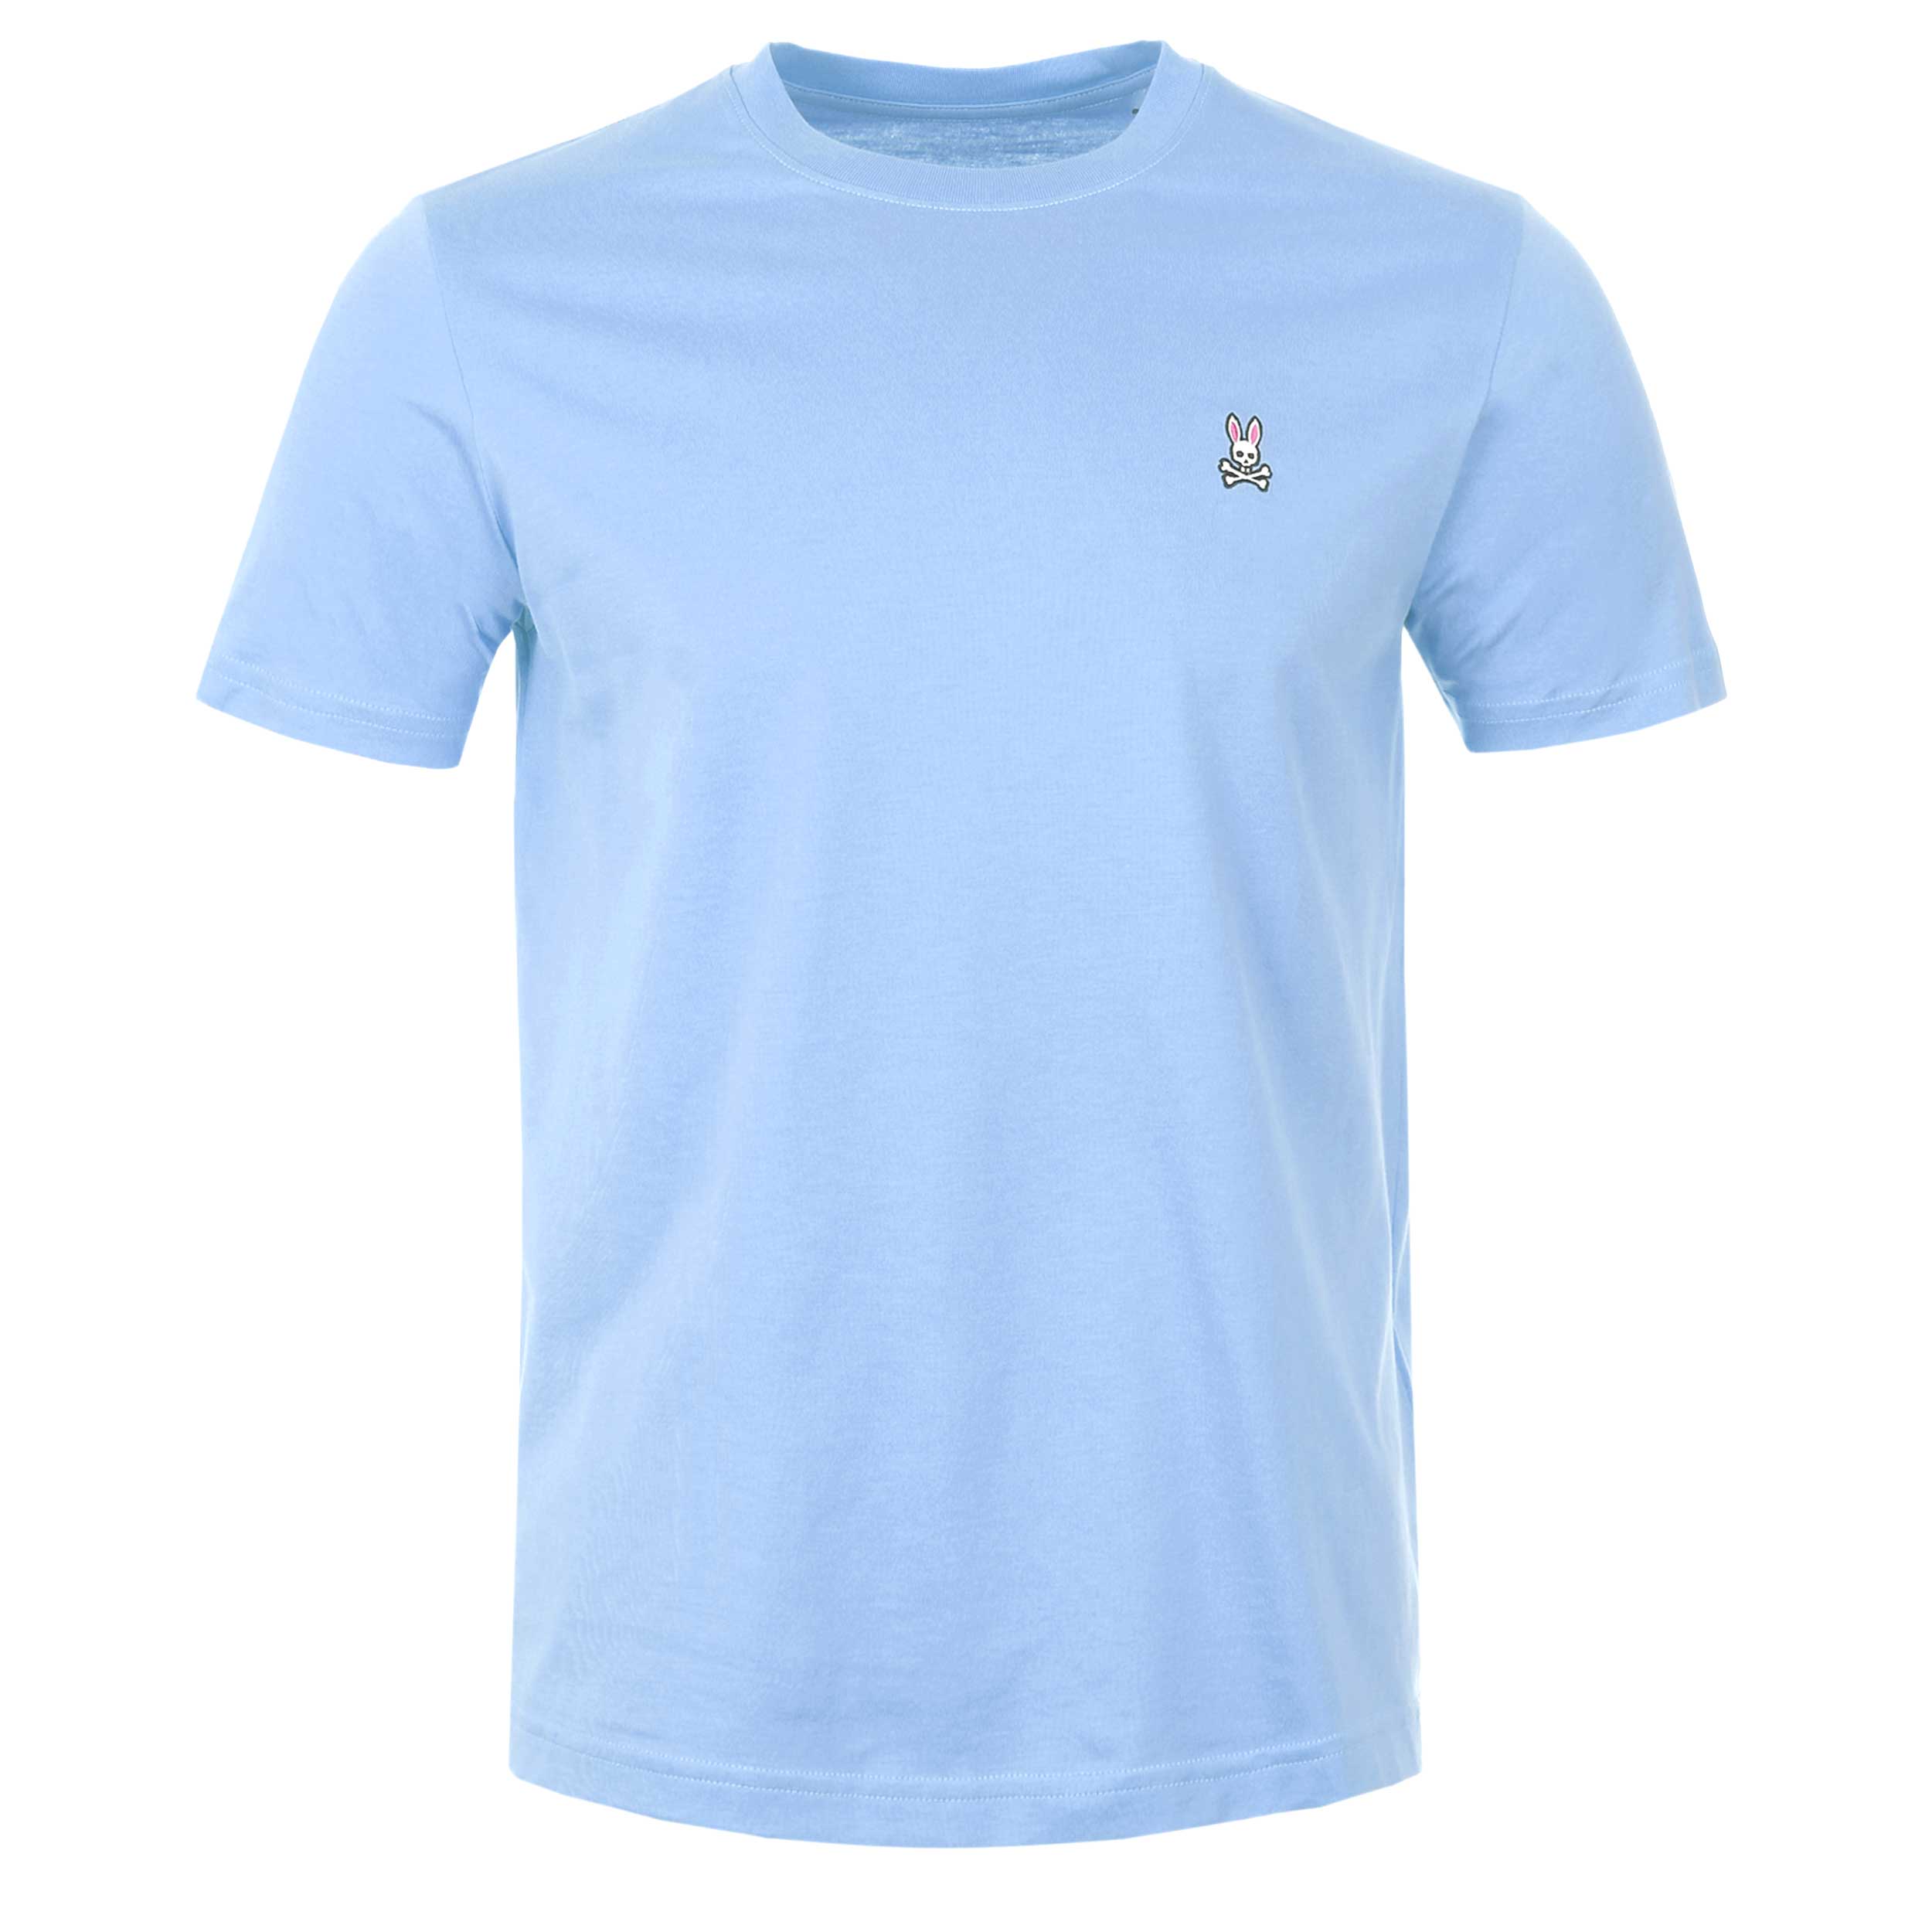 Psycho Bunny Classic T-Shirt in Serenity Sky Blue